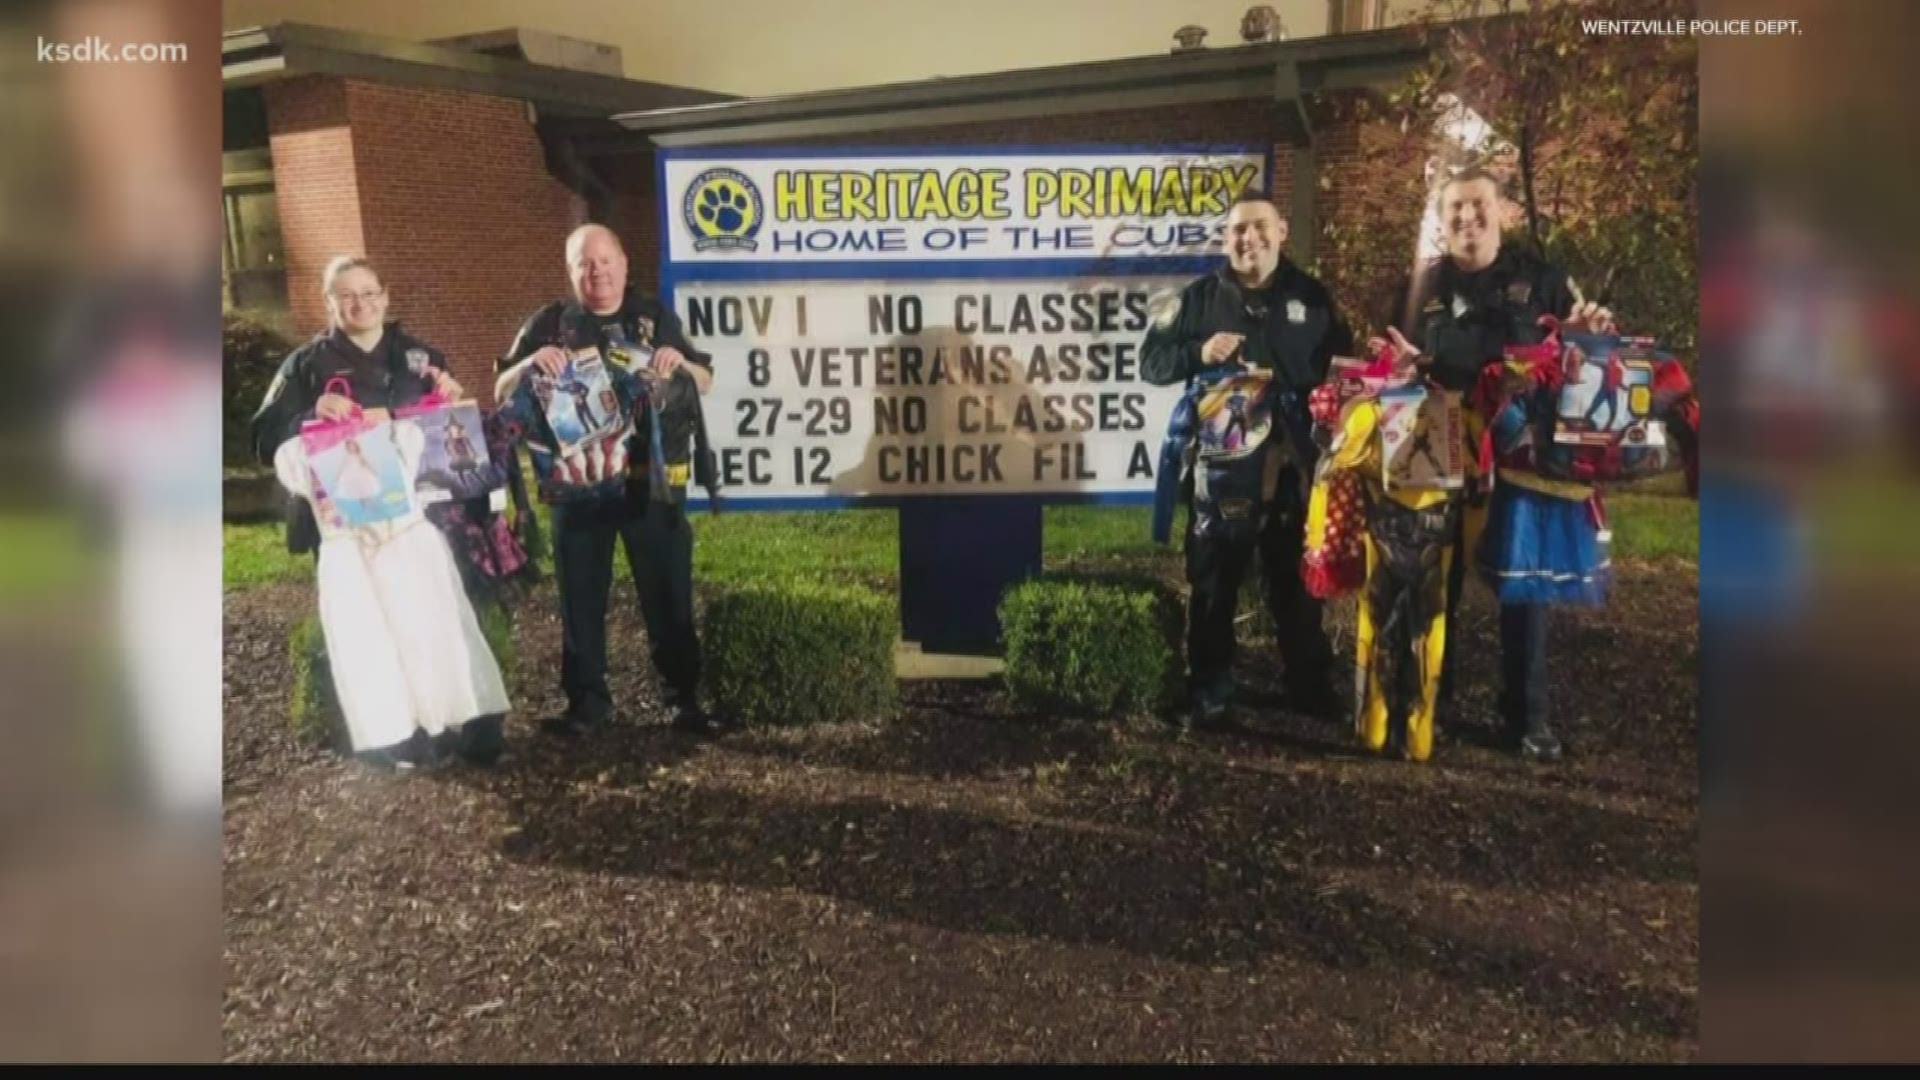 Sergeant White and officers on Platoon 4 pooled their money together and bought 10 costumes for students at Heritage Elementary School.